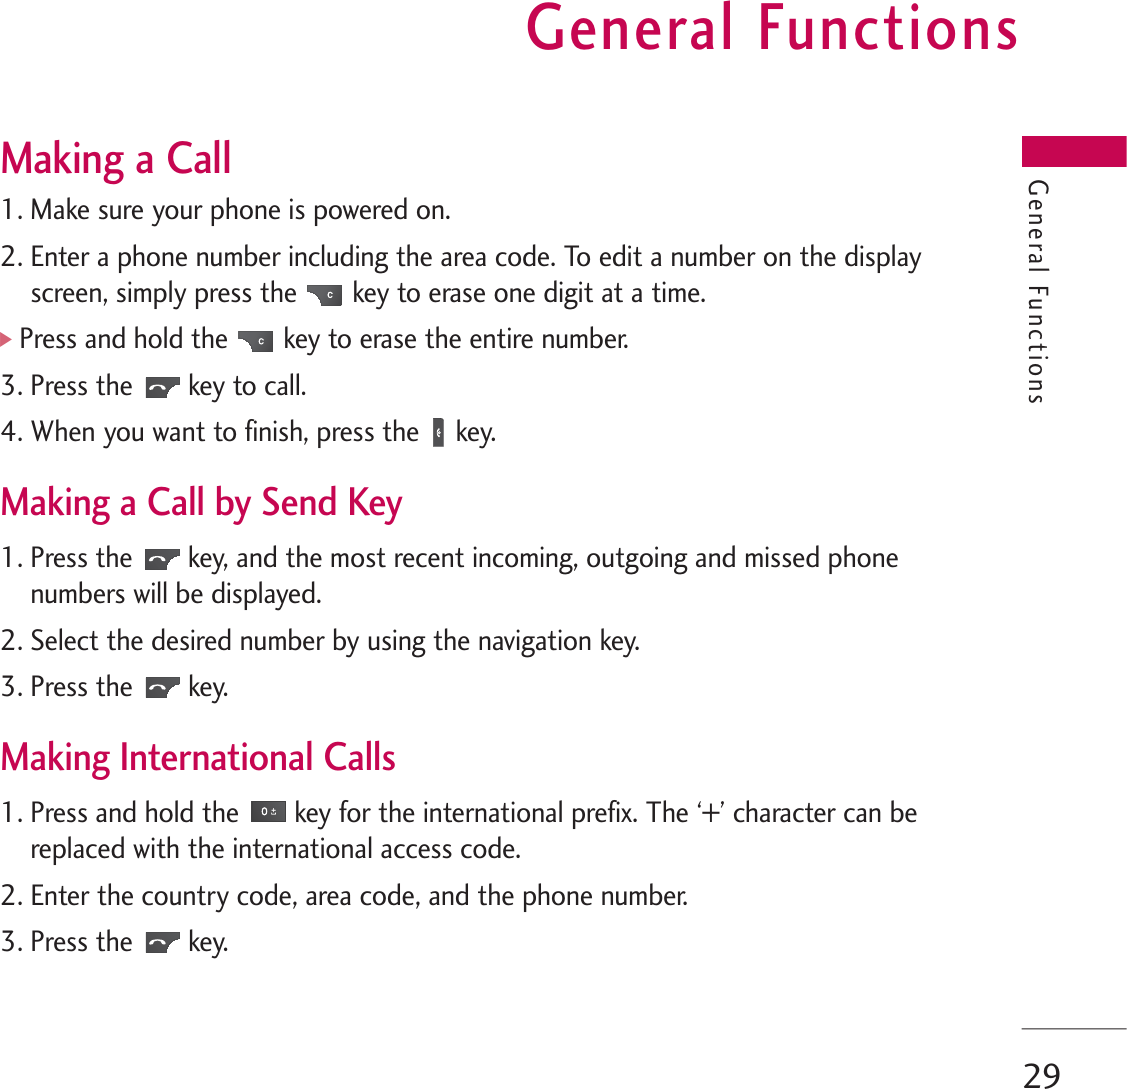 General Functions29Making a Call1. Make sure your phone is powered on.2. Enter a phone number including the area code. To edit a number on the displayscreen, simply press the key to erase one digit at a time.]Press and hold the key to erase the entire number.3. Press the key to call.4. When you want to finish, press the key.Making a Call by Send Key1. Press the key, and the most recent incoming, outgoing and missed phonenumbers will be displayed.2. Select the desired number by using the navigation key.3. Press the key.Making International Calls1. Press and hold the key for the international prefix. The ‘+’ character can bereplaced with the international access code.2. Enter the country code, area code, and the phone number.3. Press the key.General Functions